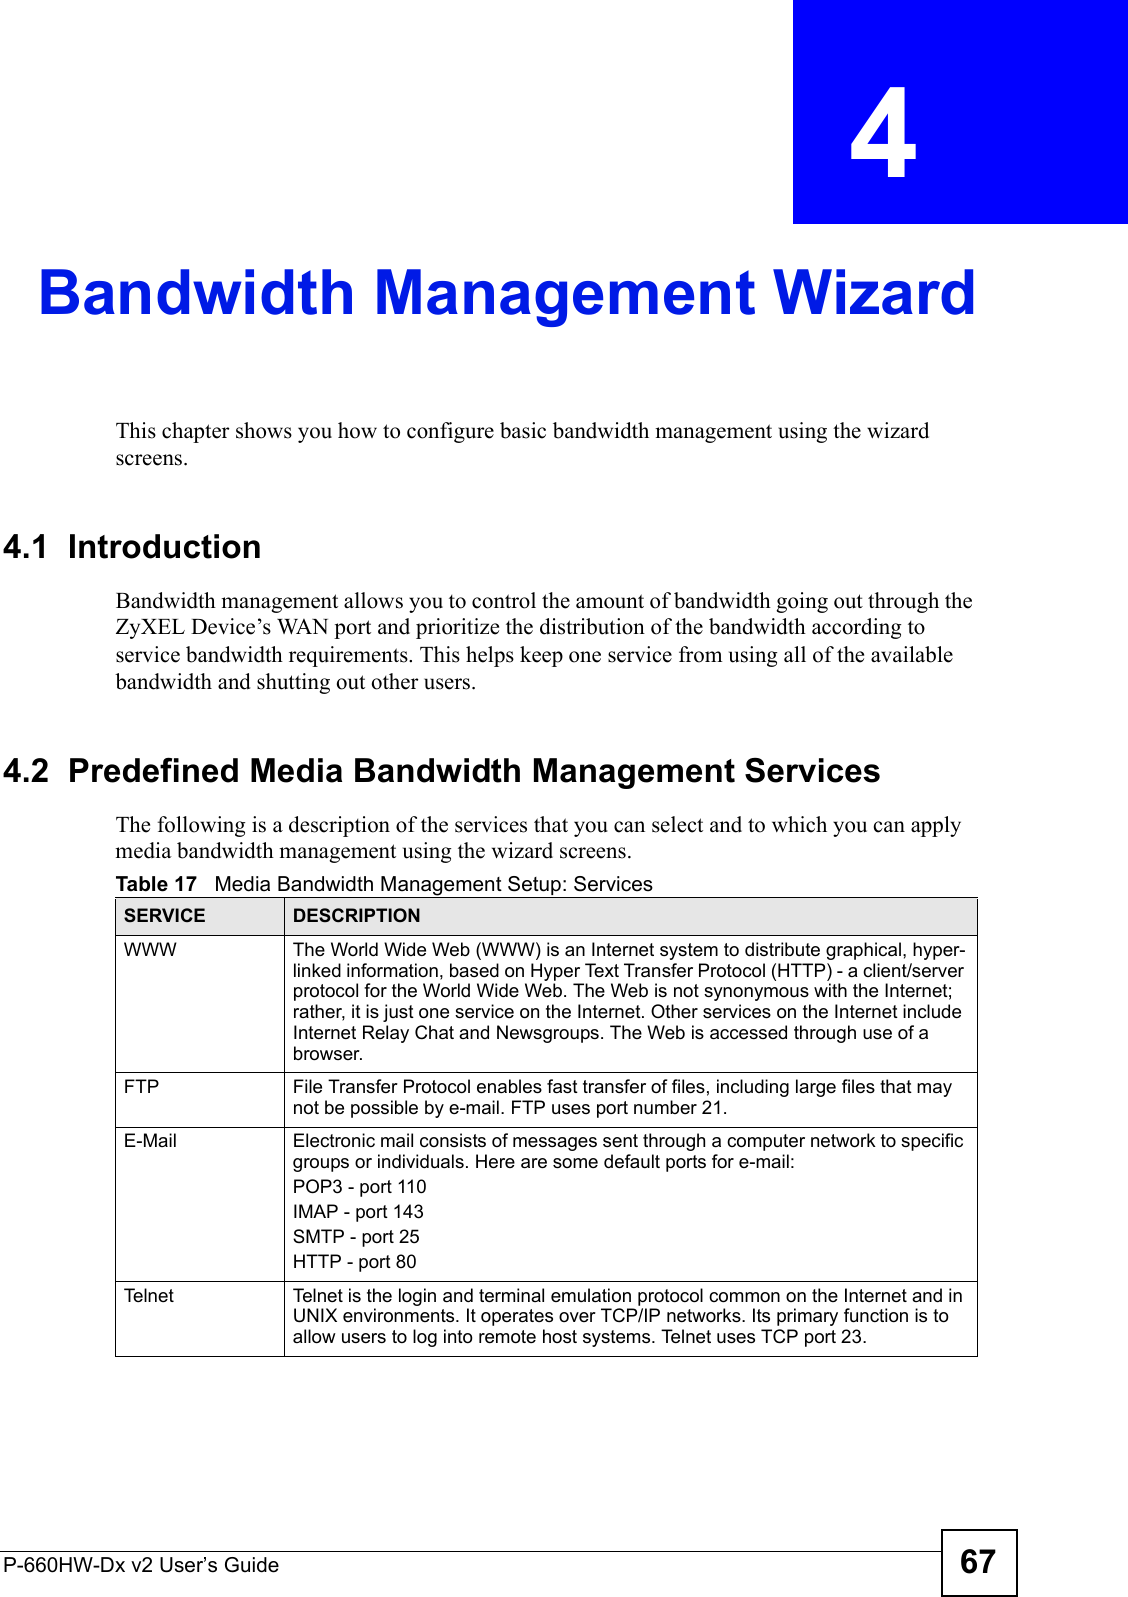 P-660HW-Dx v2 User’s Guide 67CHAPTER  4 Bandwidth Management WizardThis chapter shows you how to configure basic bandwidth management using the wizard screens.4.1  IntroductionBandwidth management allows you to control the amount of bandwidth going out through the ZyXEL Device’s WAN port and prioritize the distribution of the bandwidth according to service bandwidth requirements. This helps keep one service from using all of the available bandwidth and shutting out other users.4.2  Predefined Media Bandwidth Management ServicesThe following is a description of the services that you can select and to which you can apply media bandwidth management using the wizard screens. Table 17   Media Bandwidth Management Setup: ServicesSERVICE DESCRIPTIONWWW The World Wide Web (WWW) is an Internet system to distribute graphical, hyper-linked information, based on Hyper Text Transfer Protocol (HTTP) - a client/server protocol for the World Wide Web. The Web is not synonymous with the Internet; rather, it is just one service on the Internet. Other services on the Internet include Internet Relay Chat and Newsgroups. The Web is accessed through use of a browser.FTP File Transfer Protocol enables fast transfer of files, including large files that may not be possible by e-mail. FTP uses port number 21.E-Mail Electronic mail consists of messages sent through a computer network to specific groups or individuals. Here are some default ports for e-mail: POP3 - port 110IMAP - port 143SMTP - port 25HTTP - port 80Telnet Telnet is the login and terminal emulation protocol common on the Internet and in UNIX environments. It operates over TCP/IP networks. Its primary function is to allow users to log into remote host systems. Telnet uses TCP port 23.